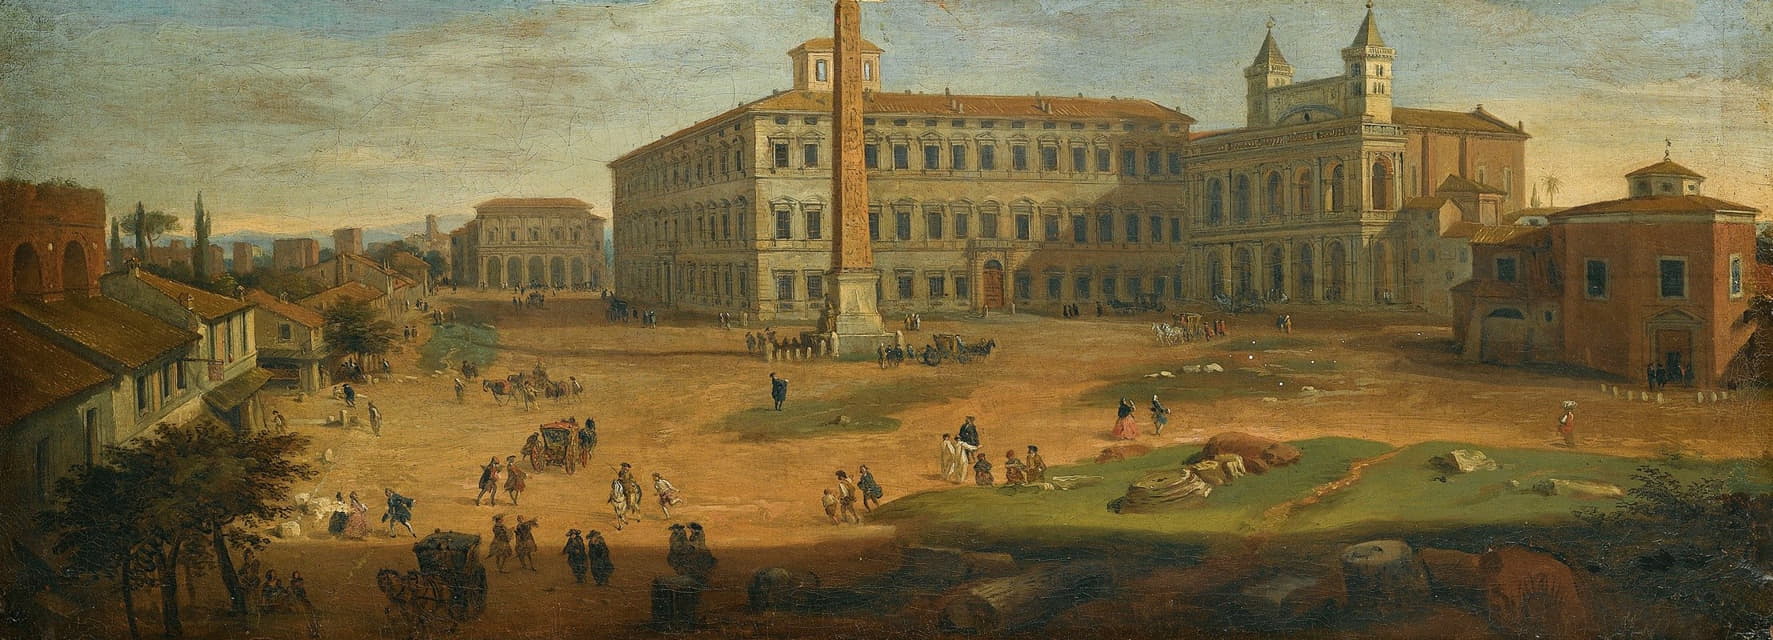 Follower of Gaspar van Wittel - Rome, A View Of Piazza San Giovanni Laterano With Figures And Horse-Drawn Carts